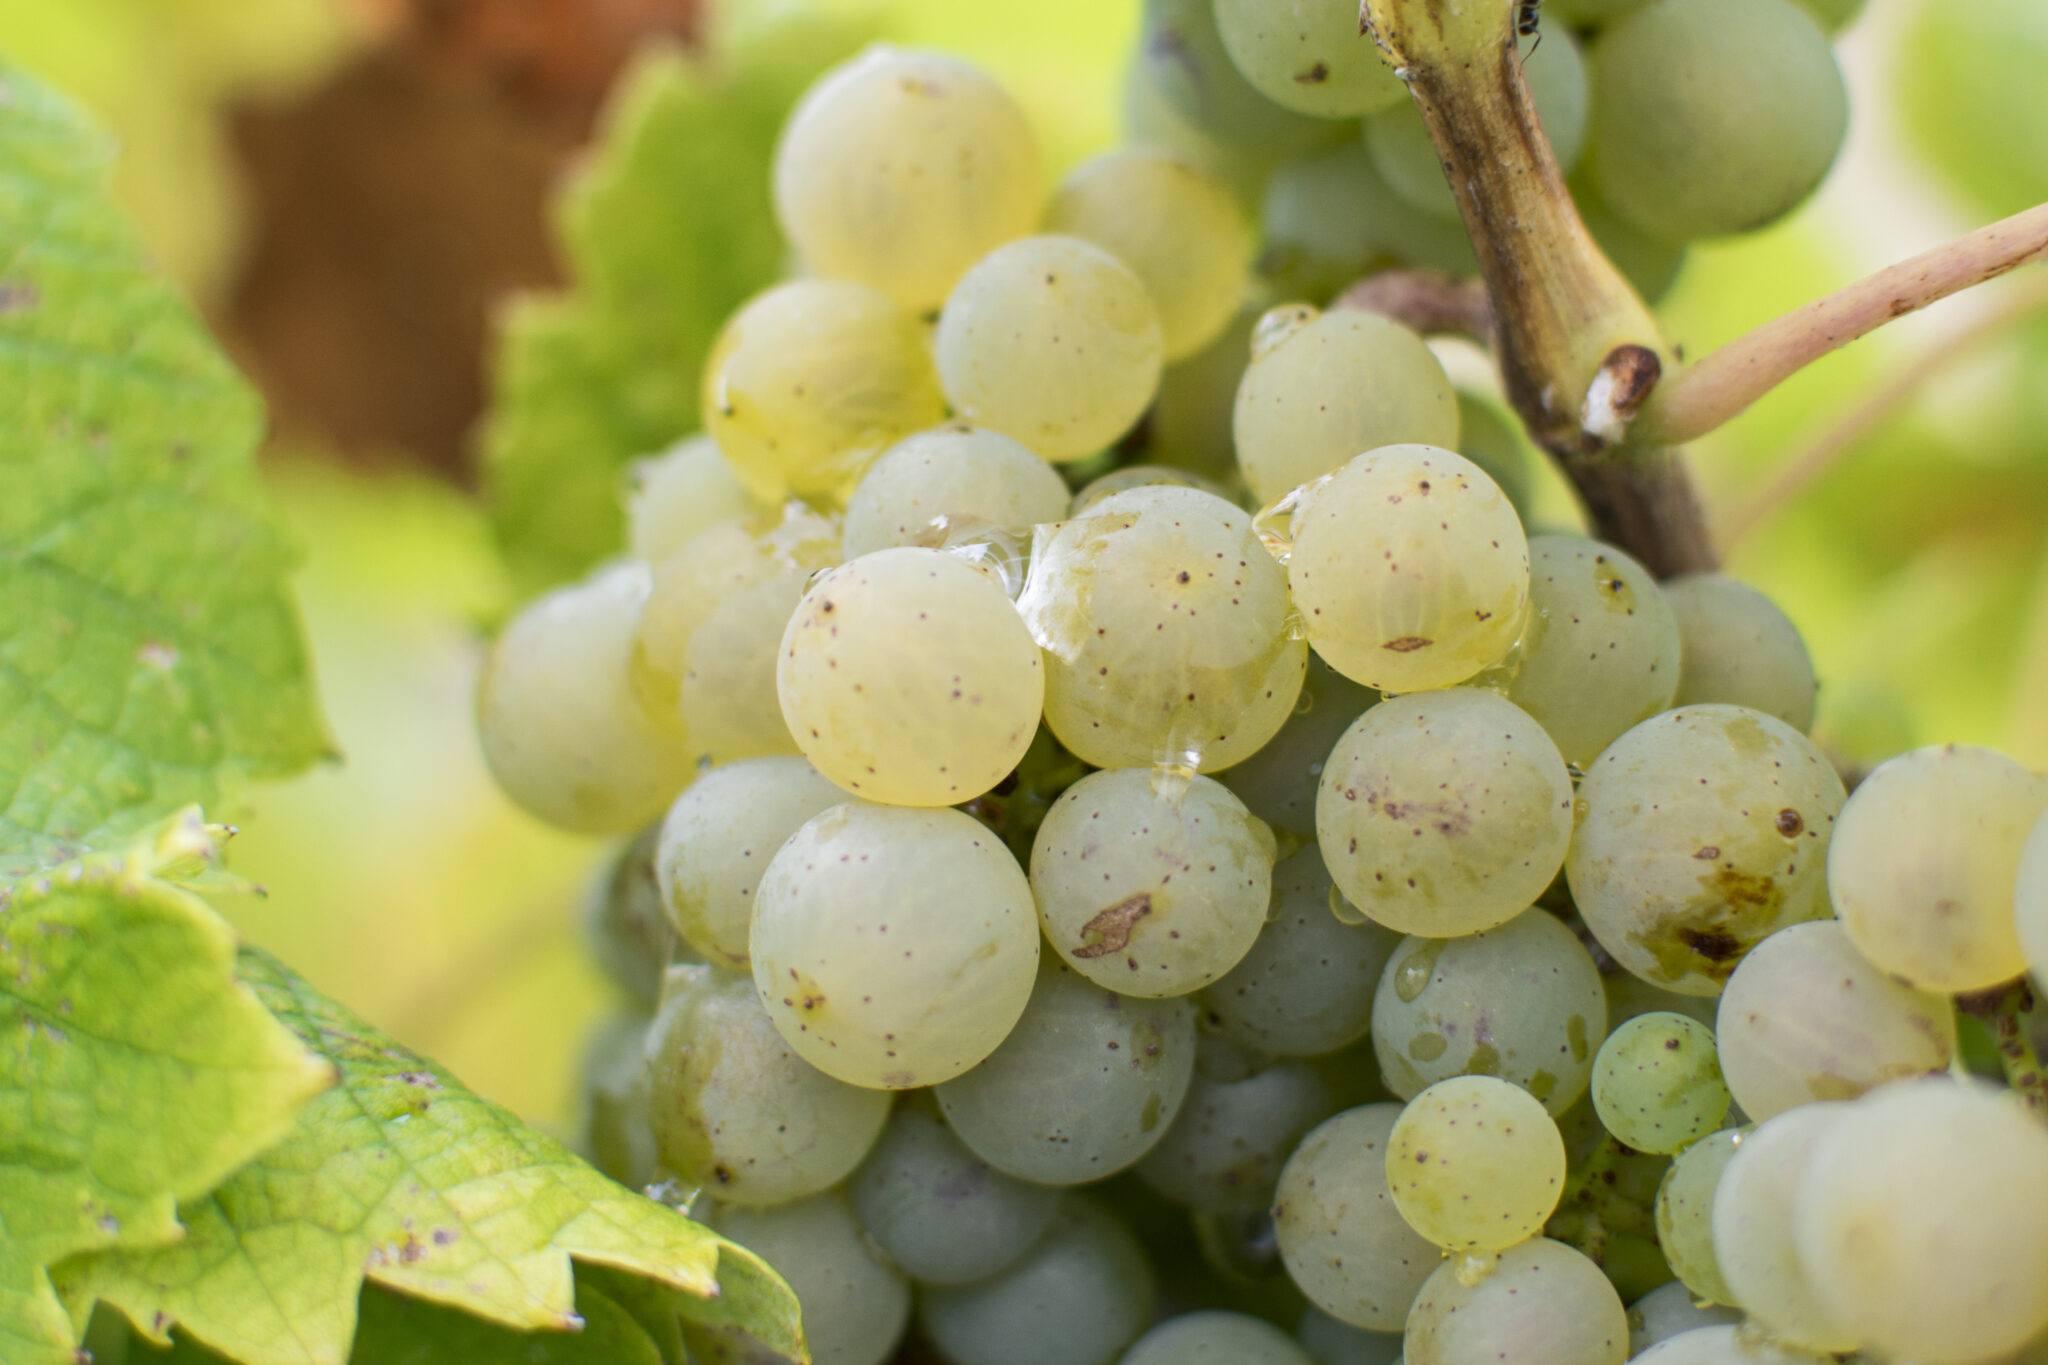 Bunches of ripe white grapes on vine